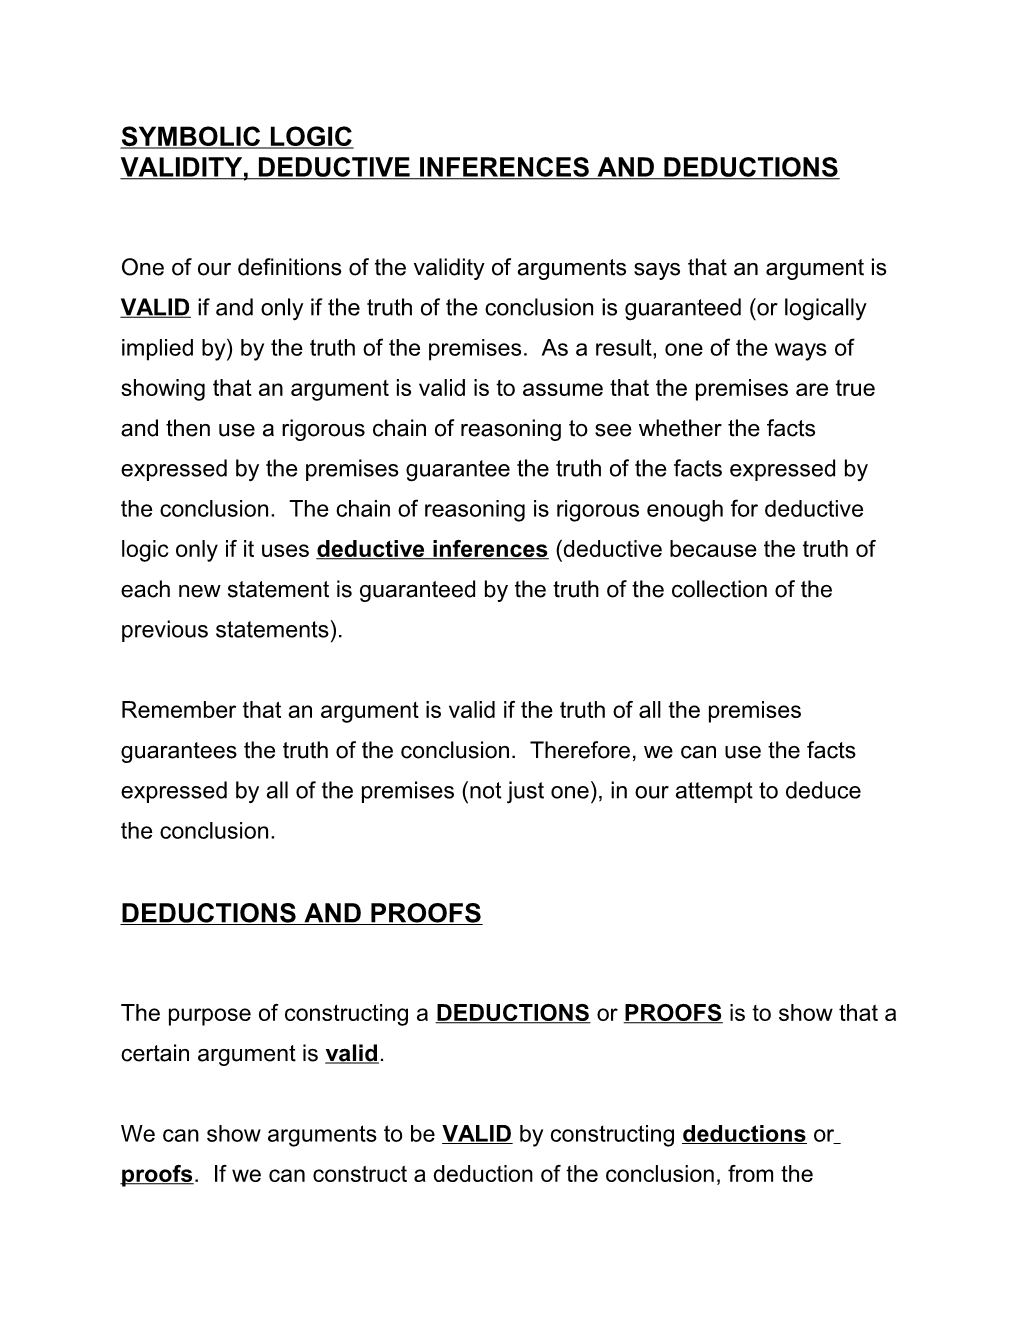 Validity, Deductive Inferences and Deductions